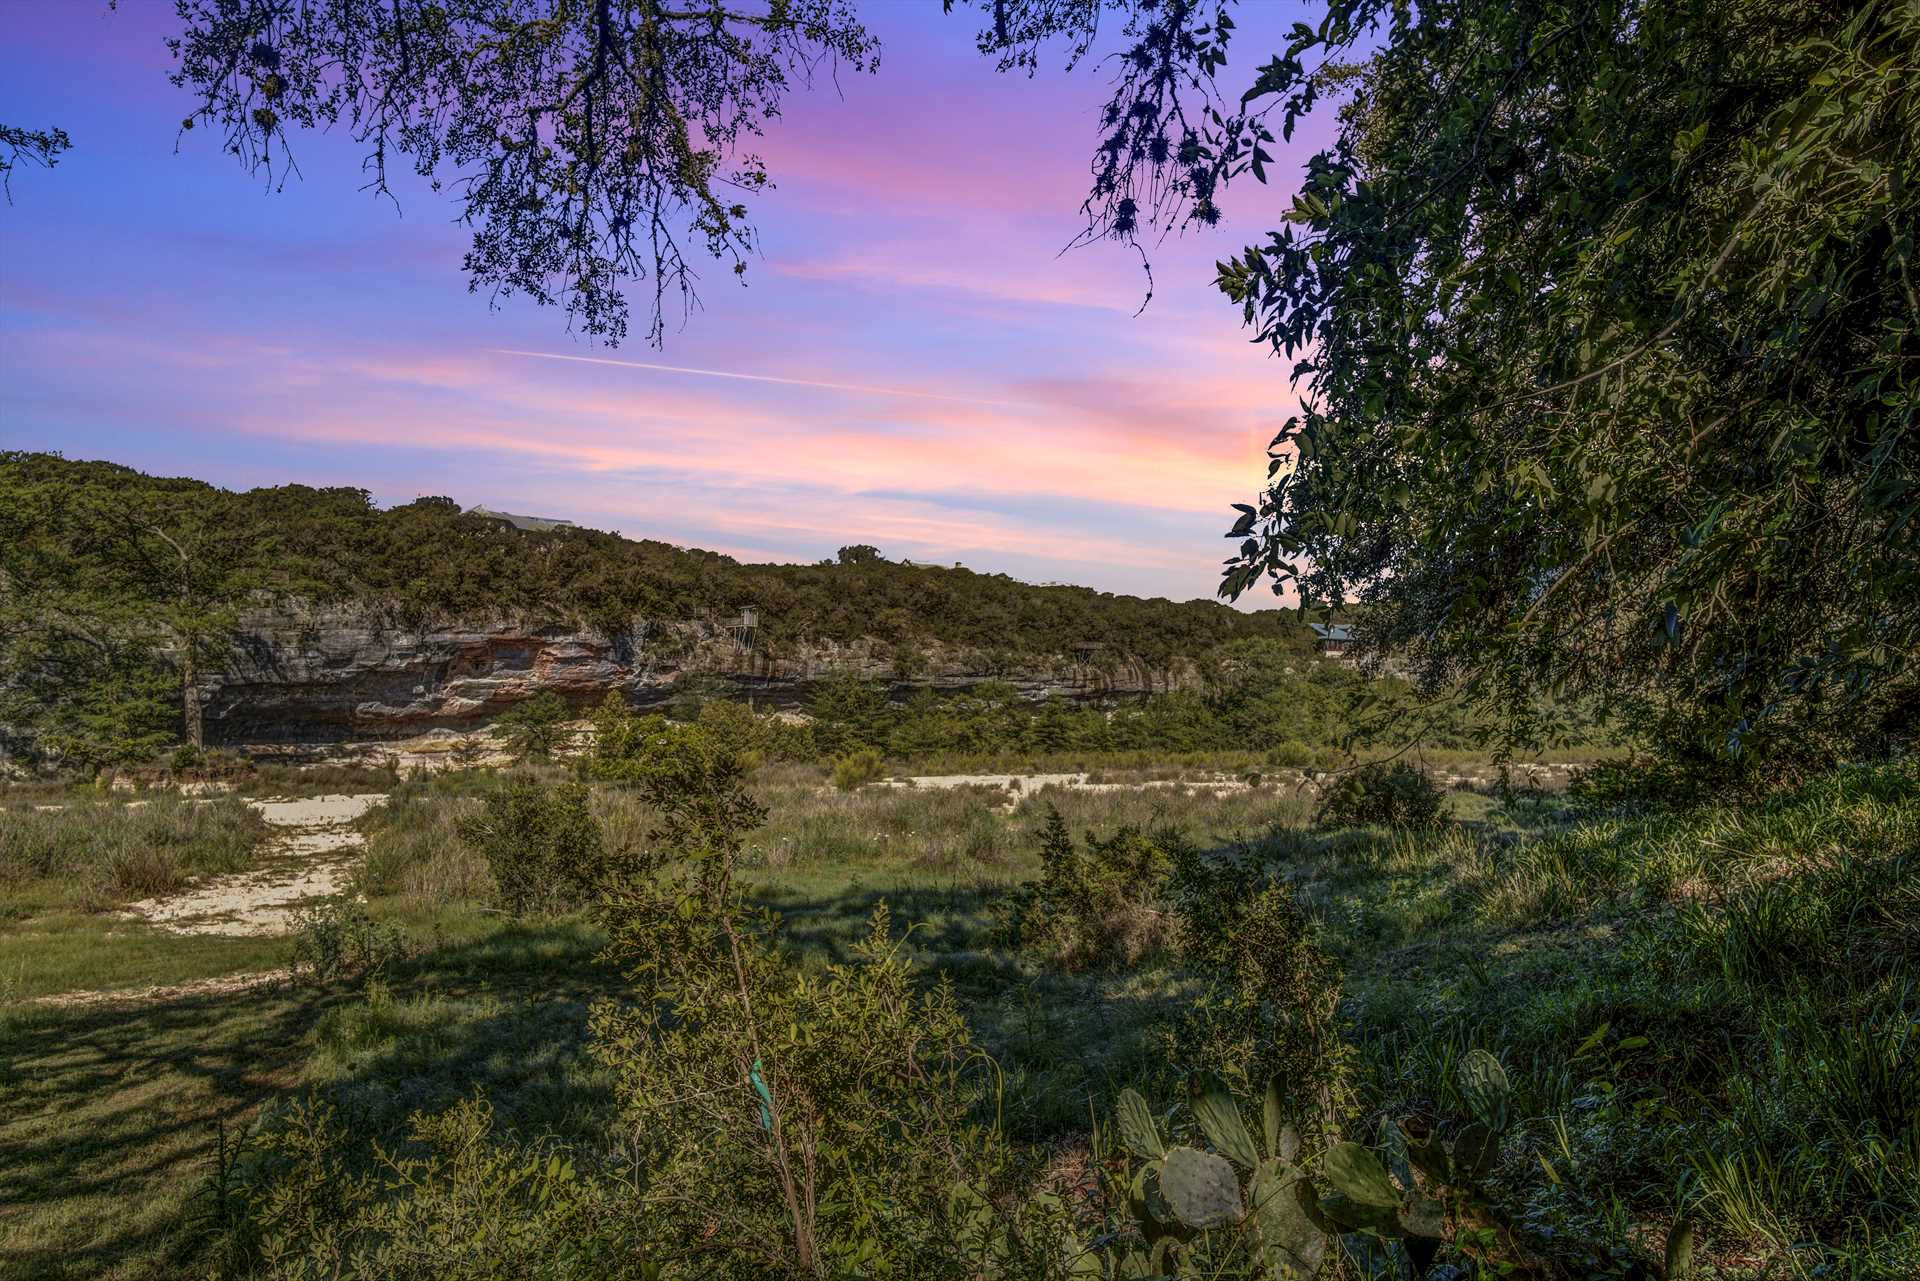                                                 Mountainous Hill Country views, brilliantly-colored sunsets, and star-filled night skies surround the River Bluff Retreat!